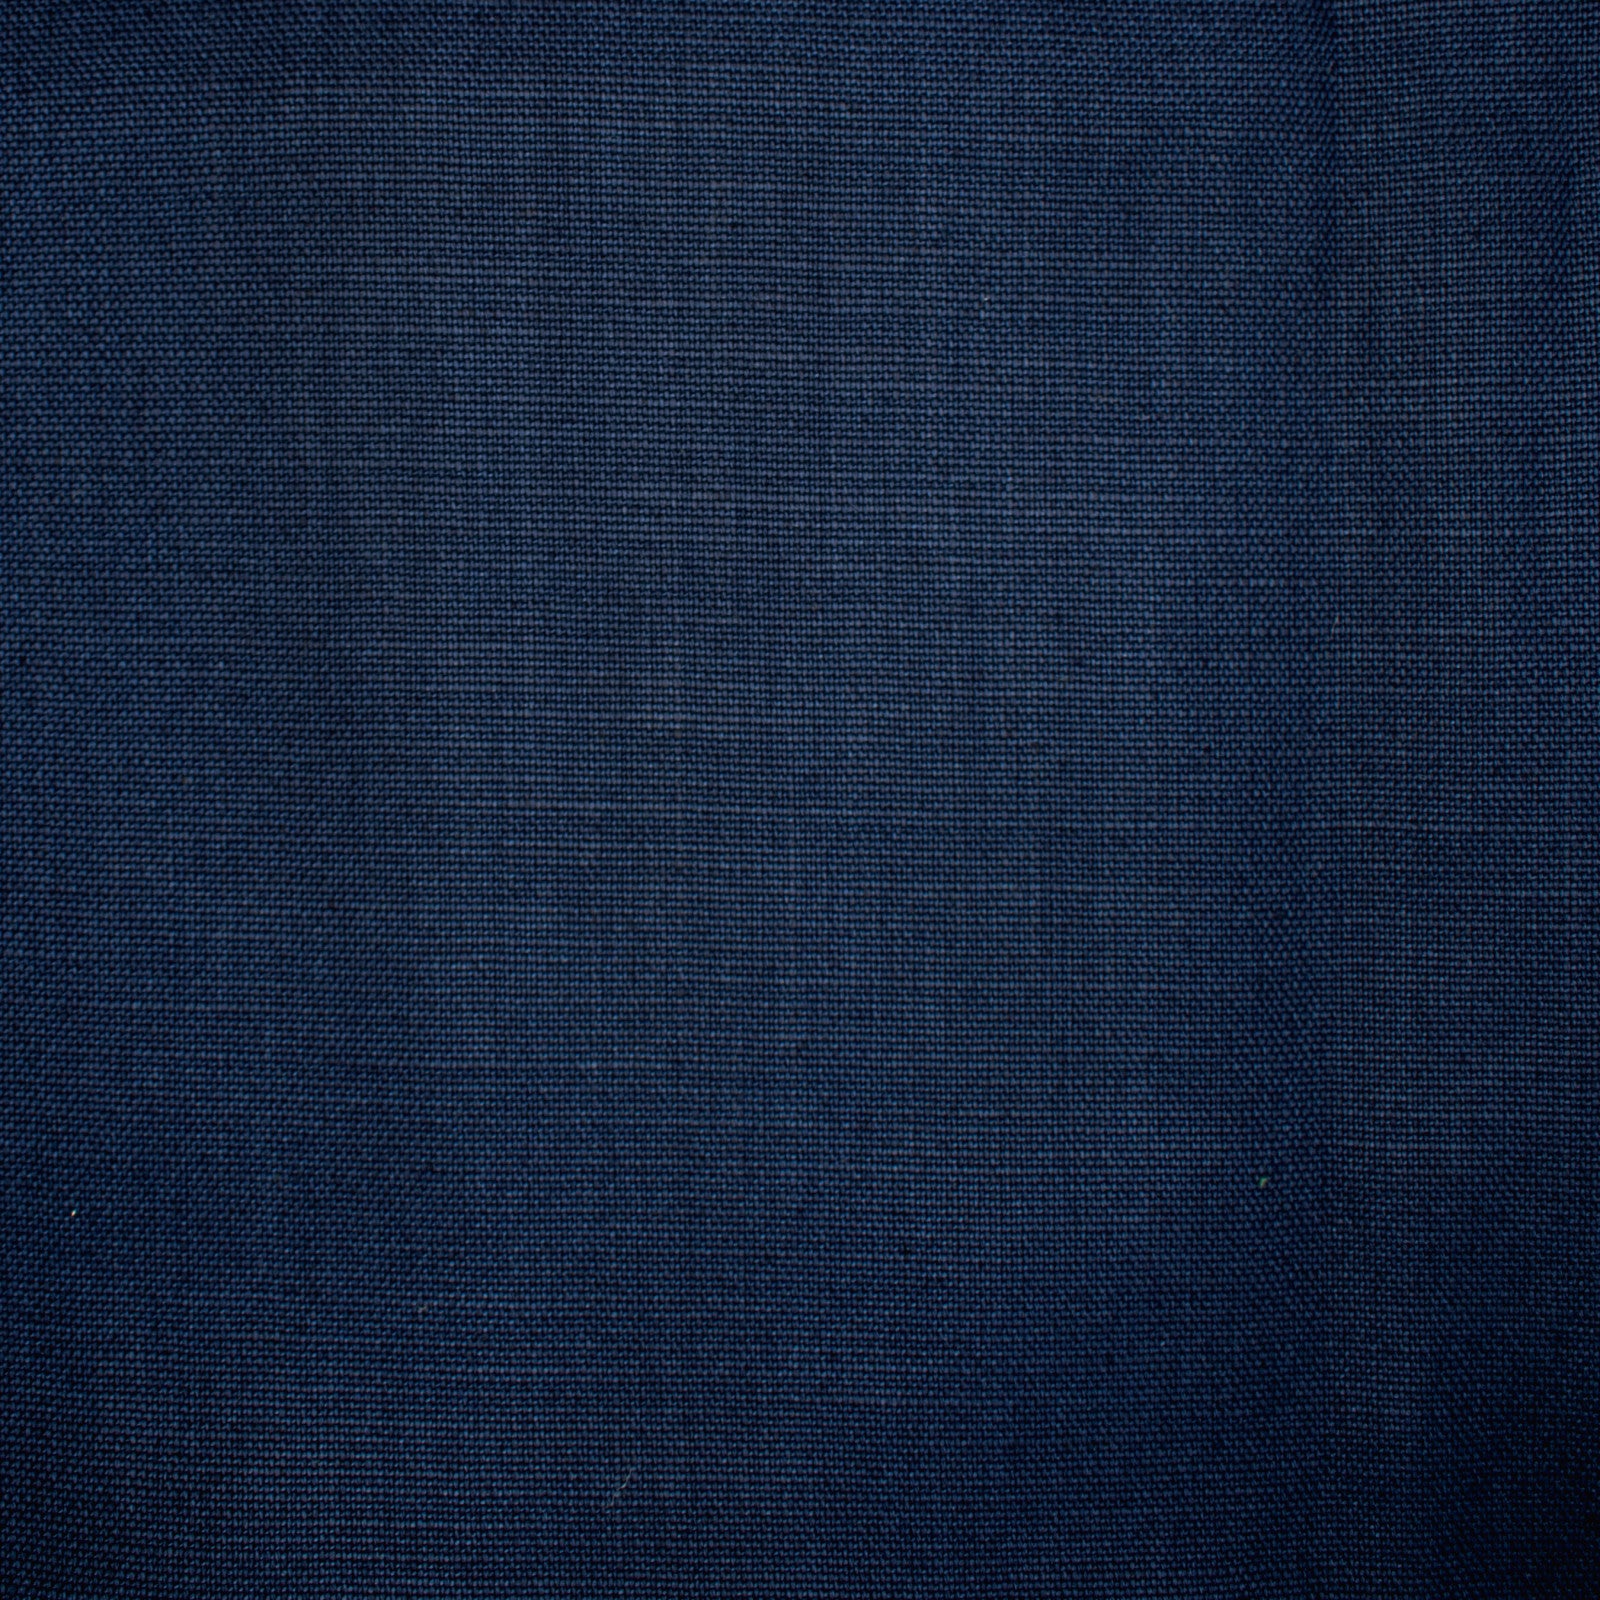 Purchase Greenhouse Fabric S1199 Navy